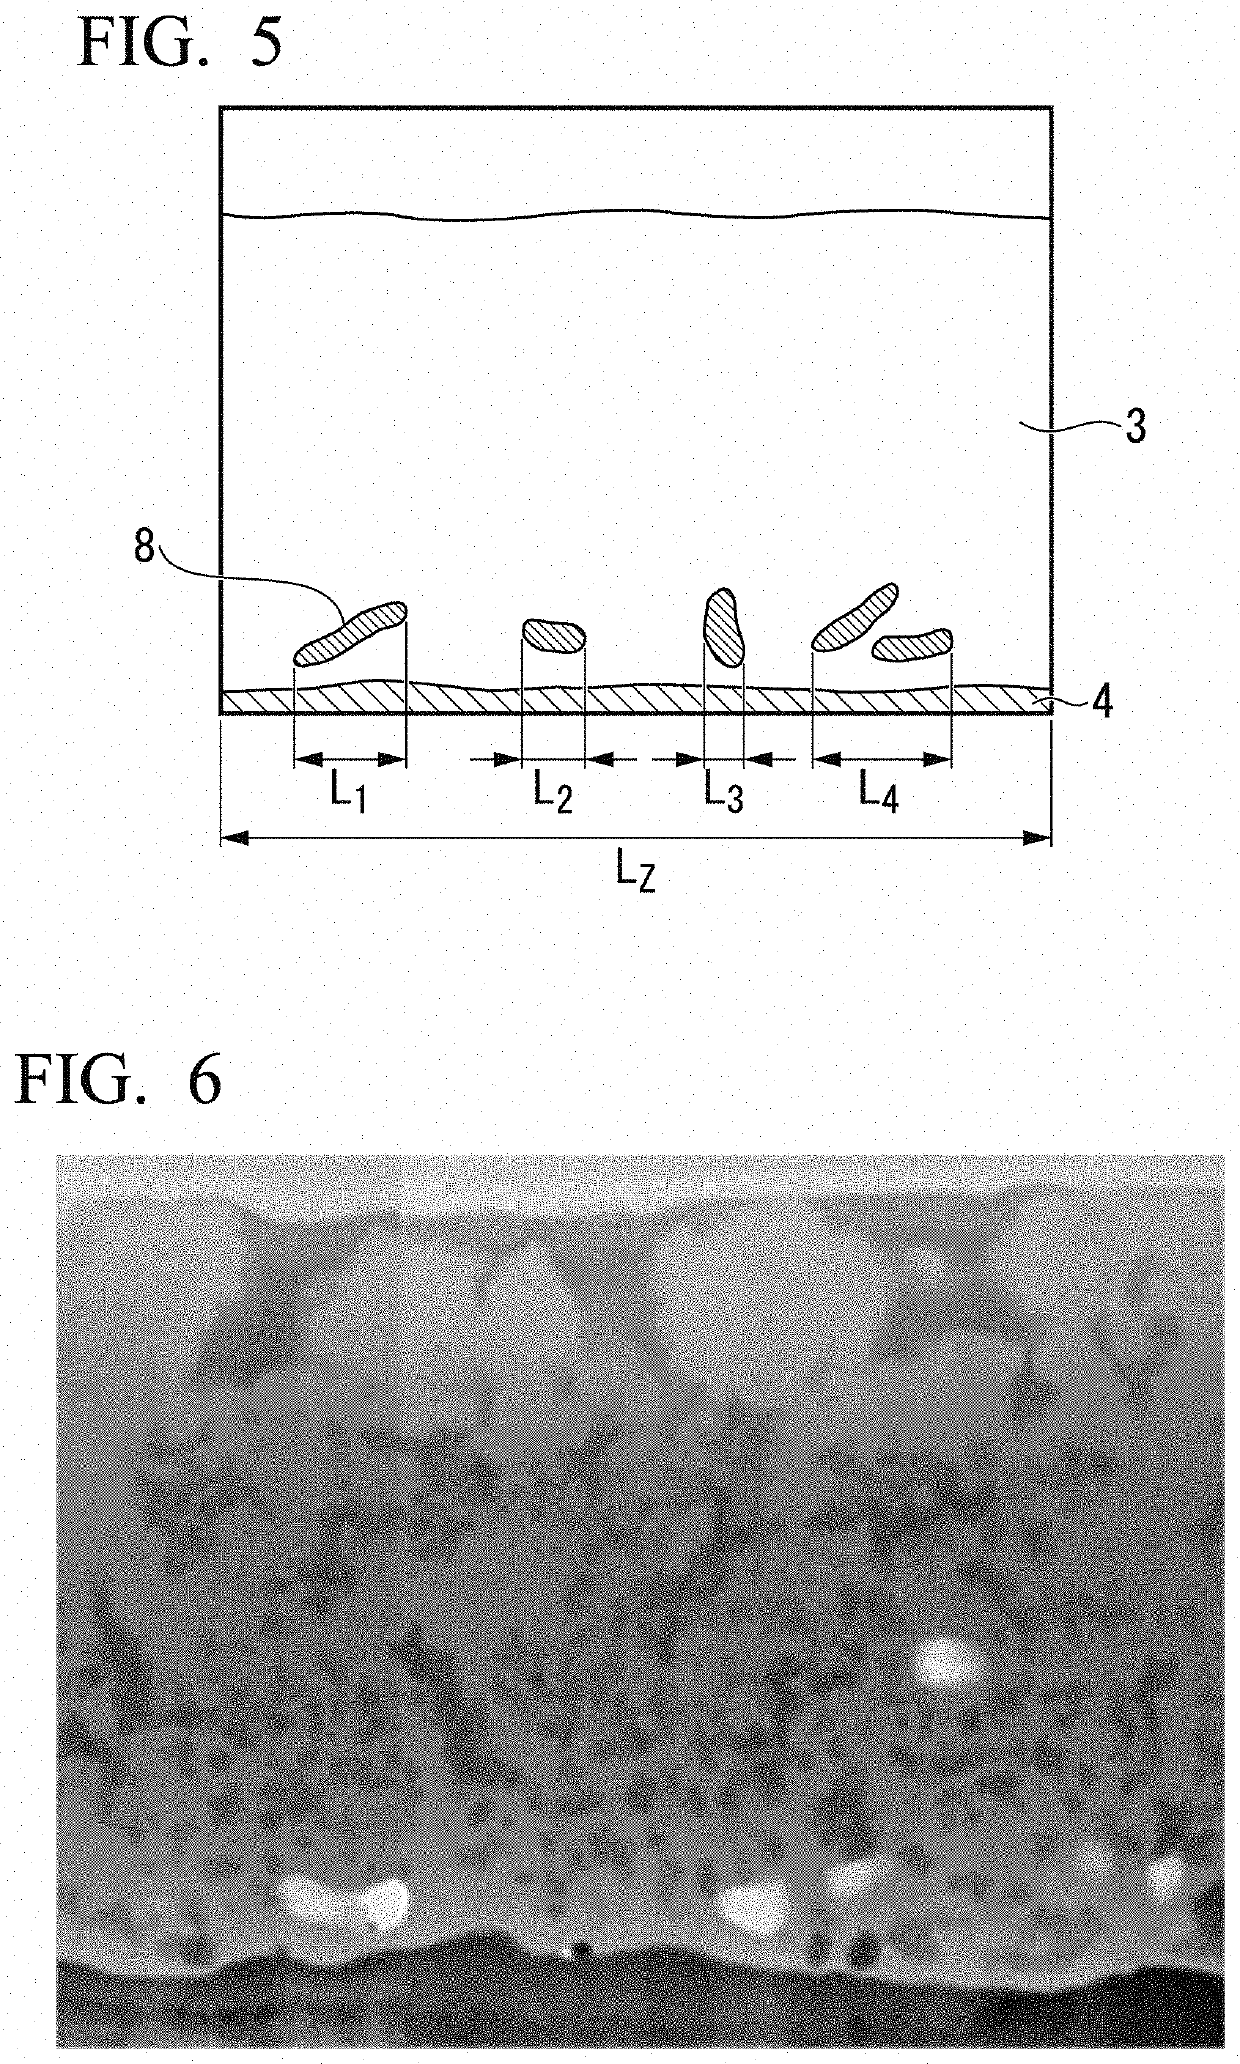 Grain-oriented electrical steel sheet and method for manufacturing the same